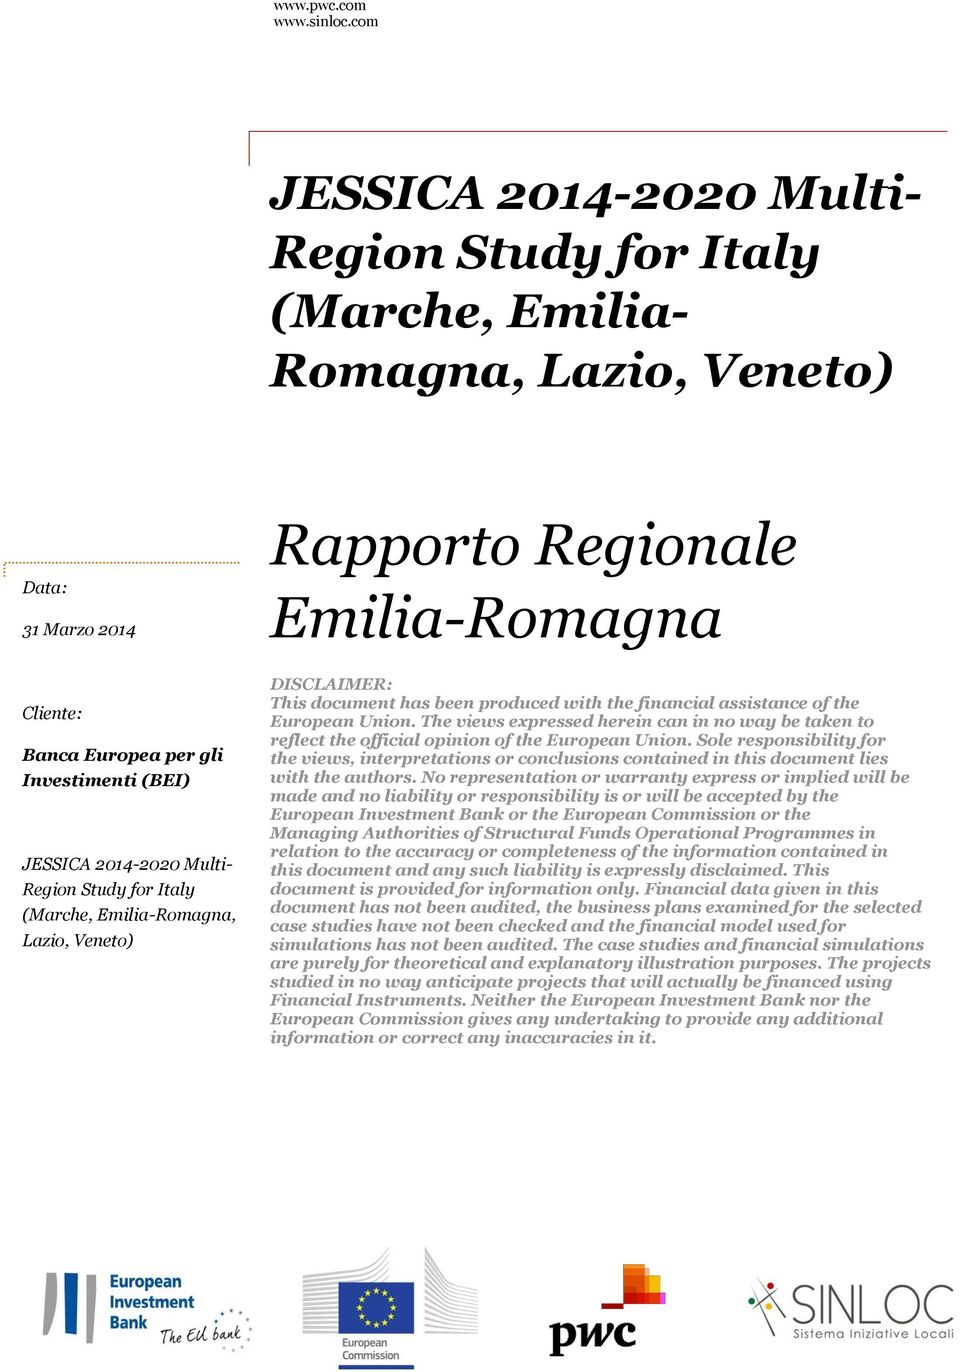 JESSICA 2014-2020 Multi- Region Study for Italy (Marche, Emilia-Romagna, Lazio, Veneto) DISCLAIMER: This document has been produced with the financial assistance of the European Union.